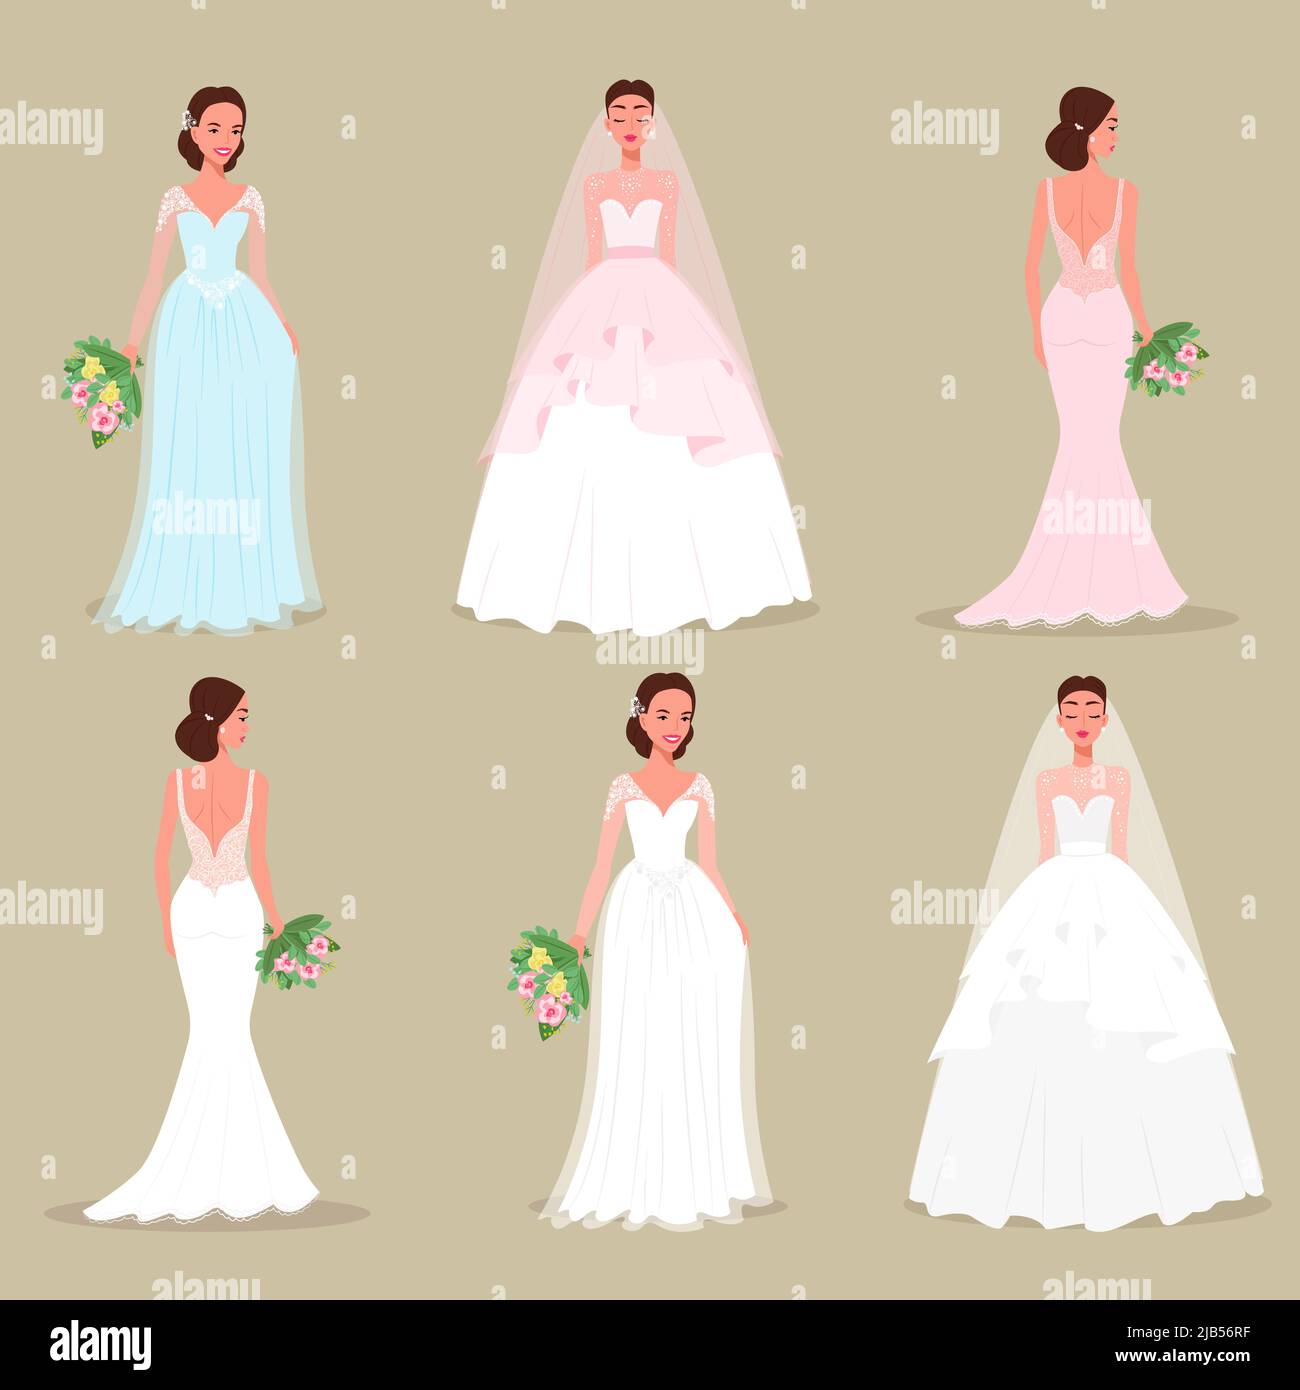 Set of brides in beautiful dresses and hairstyles with bouquets in their hands. Vector illustration flat style Stock Vector